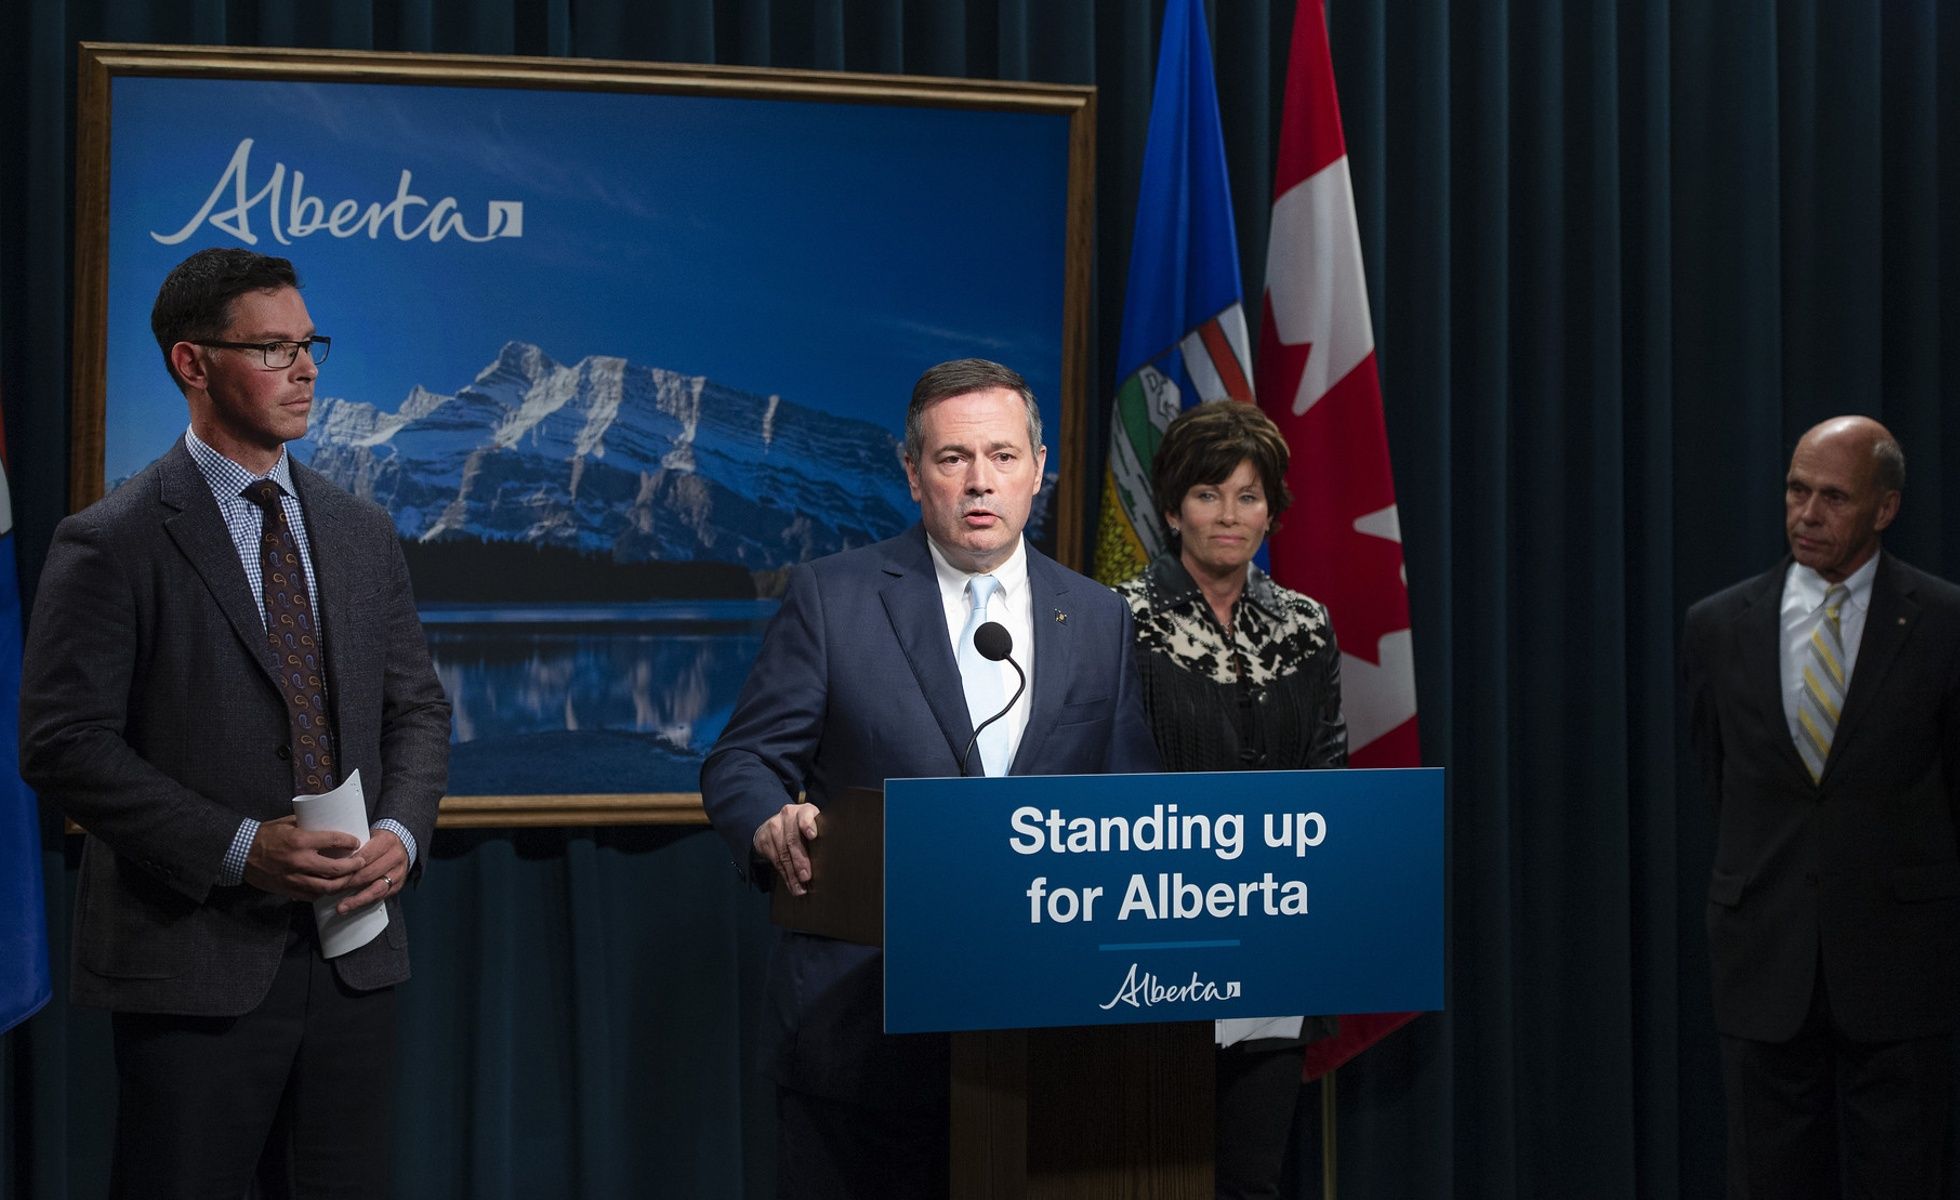 Jason Kenney announcing Public Inquiry into Anti-Alberta Energy Campaigns. He is standing in front of a podium that reads "Standing up for Alberta"